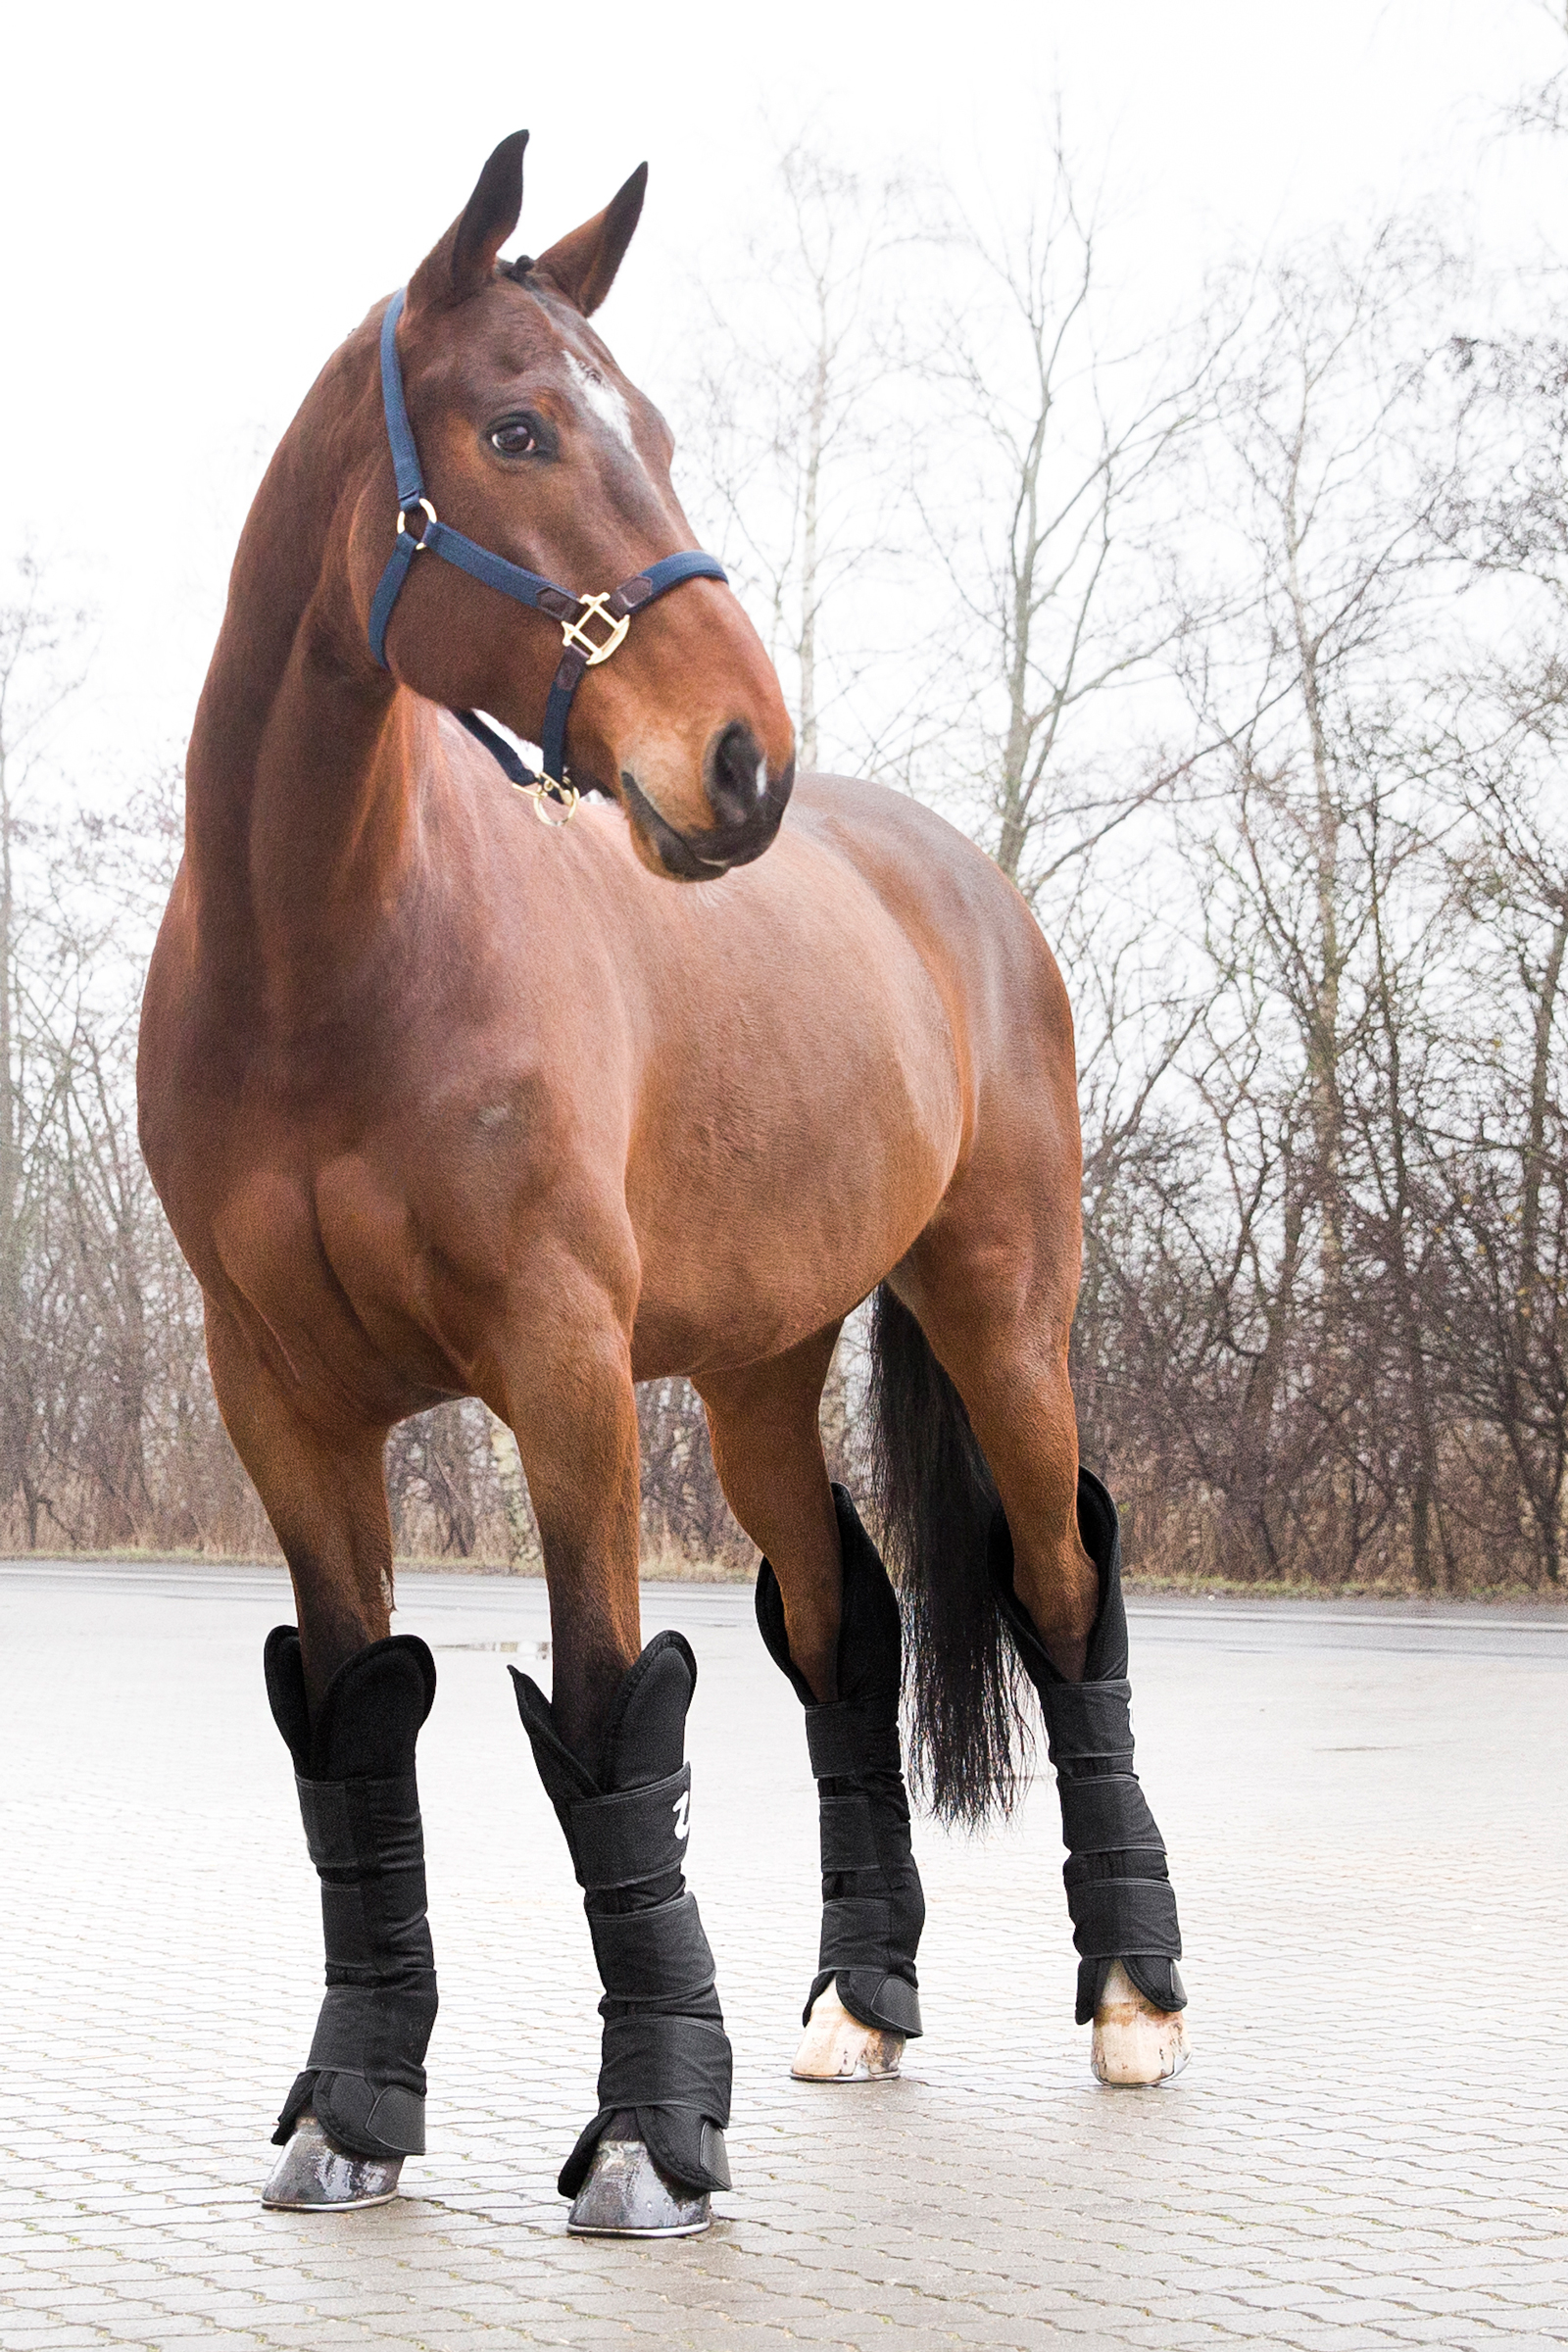 Christ Boots, hindlegs